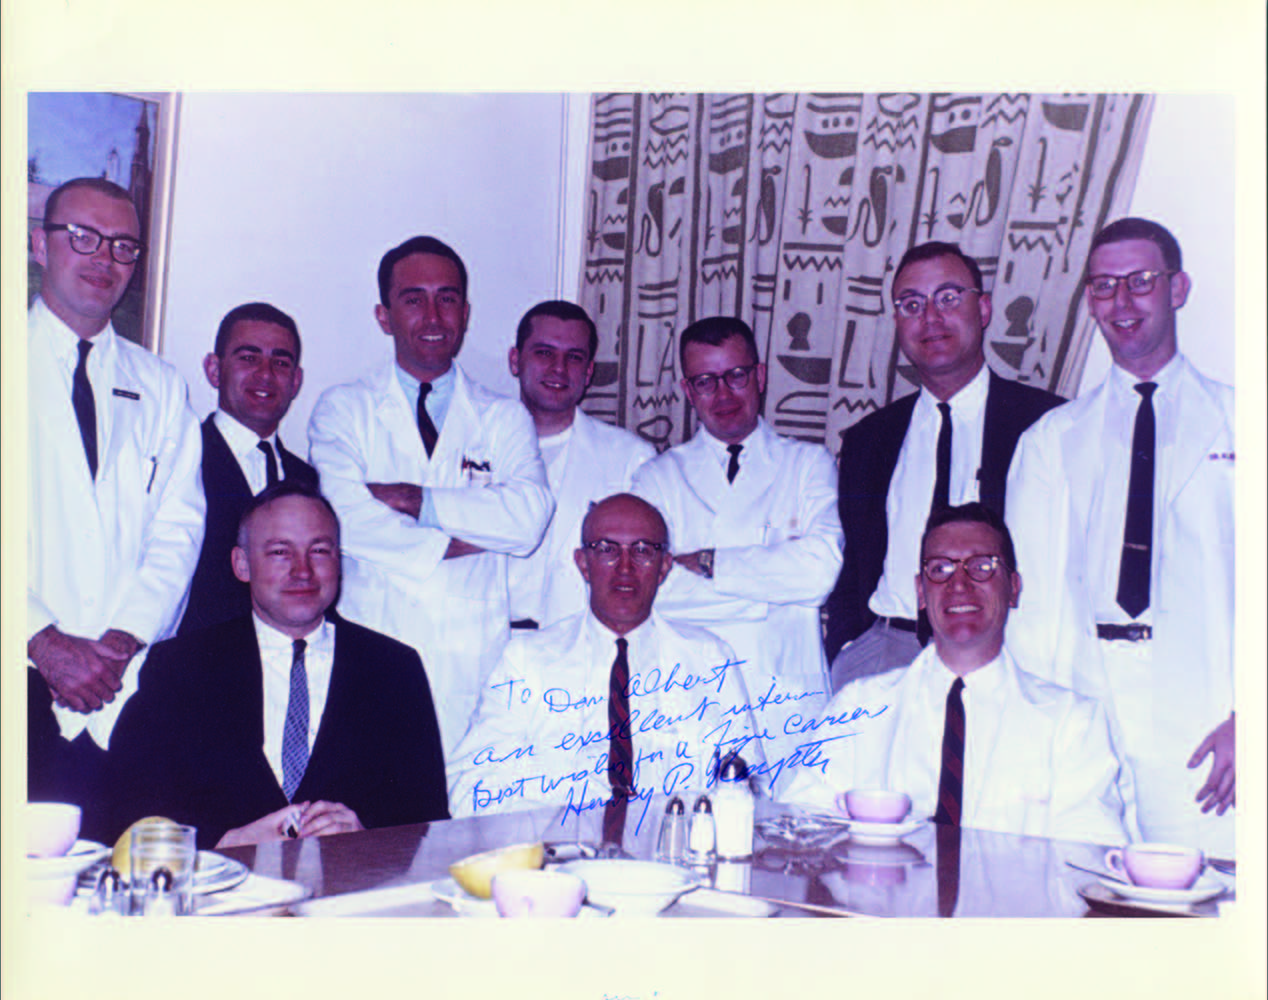   Dan Albert (far right), as a student in 1960 on the Plastics Service with Chief, Dr. Henry P. Royster, M’35, RES’42 (center front).  